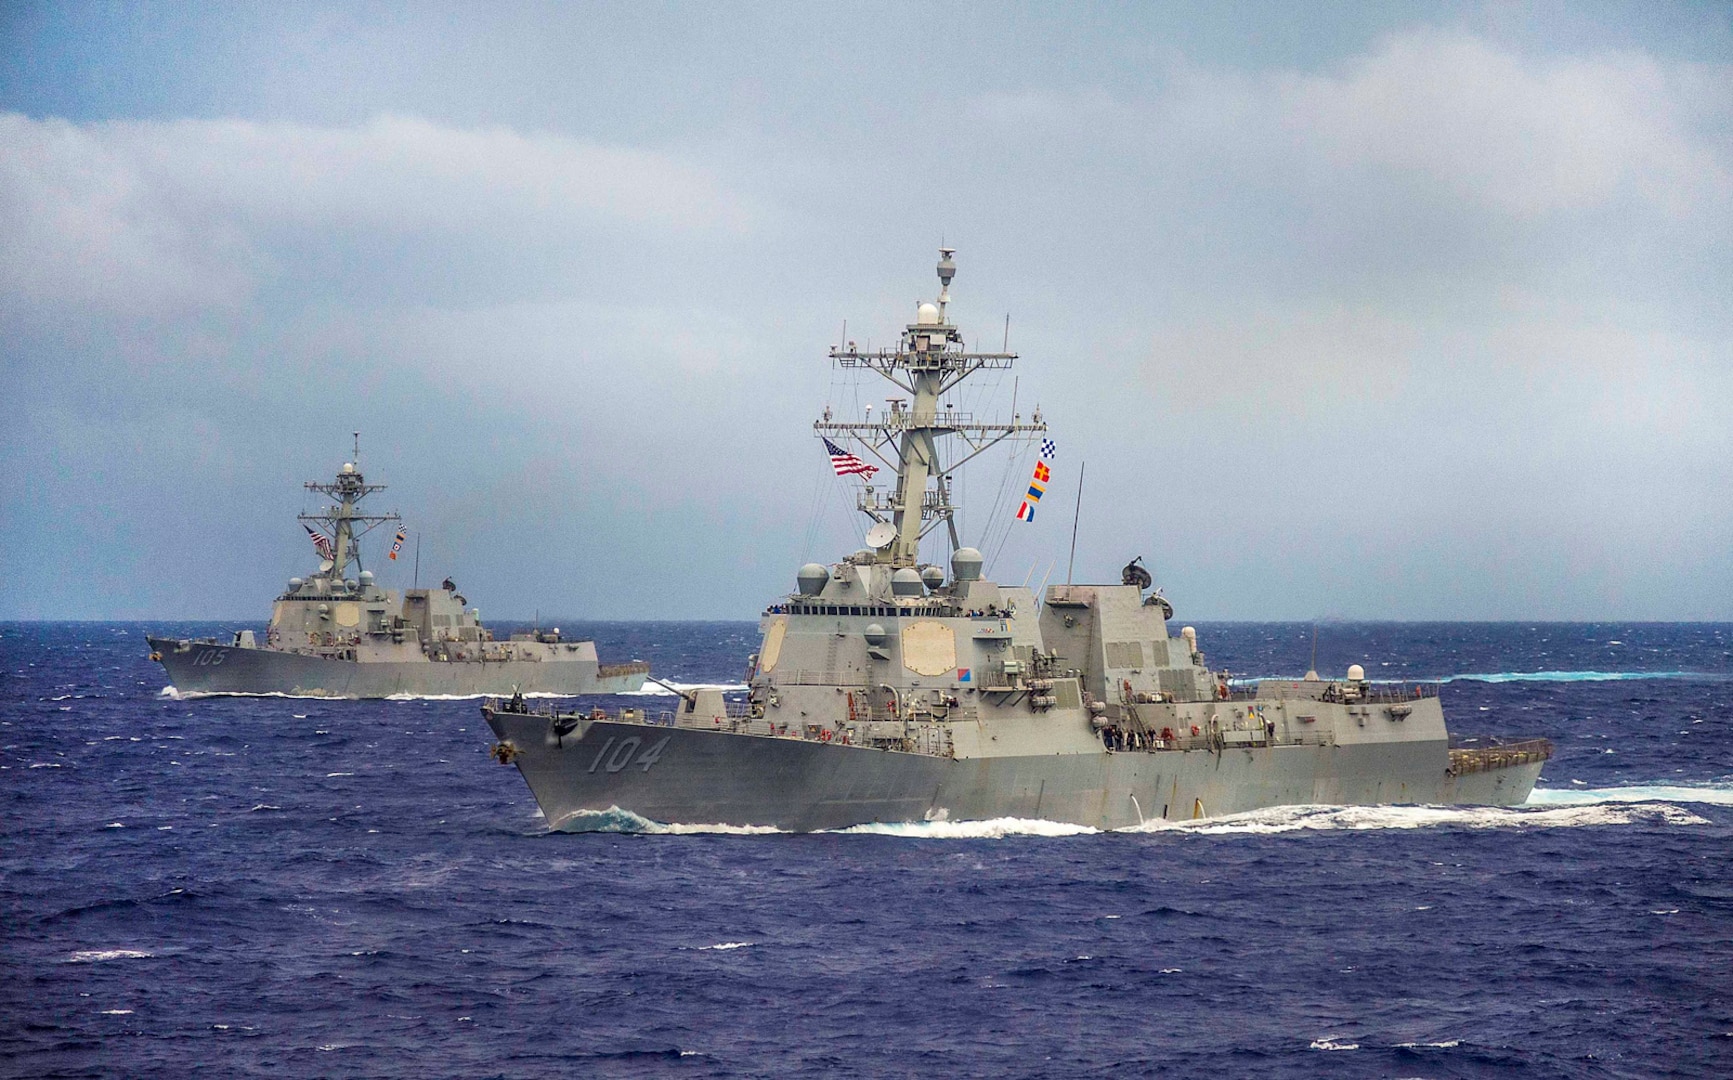 File photo:  The guided-missile destroyers USS Sterett (DDG 104), front, and USS Dewey (DDG 105) maneuver into formation during the conclusion of Valiant Shield 2014. Valiant Shield is a U.S.-only exercise integrating U.S. Navy, Air Force, Army, and Marine Corps assets, offering real-world joint operational experience to develop capabilities that provide a full range of options to defend U.S. interests and those of its allies and partners. 